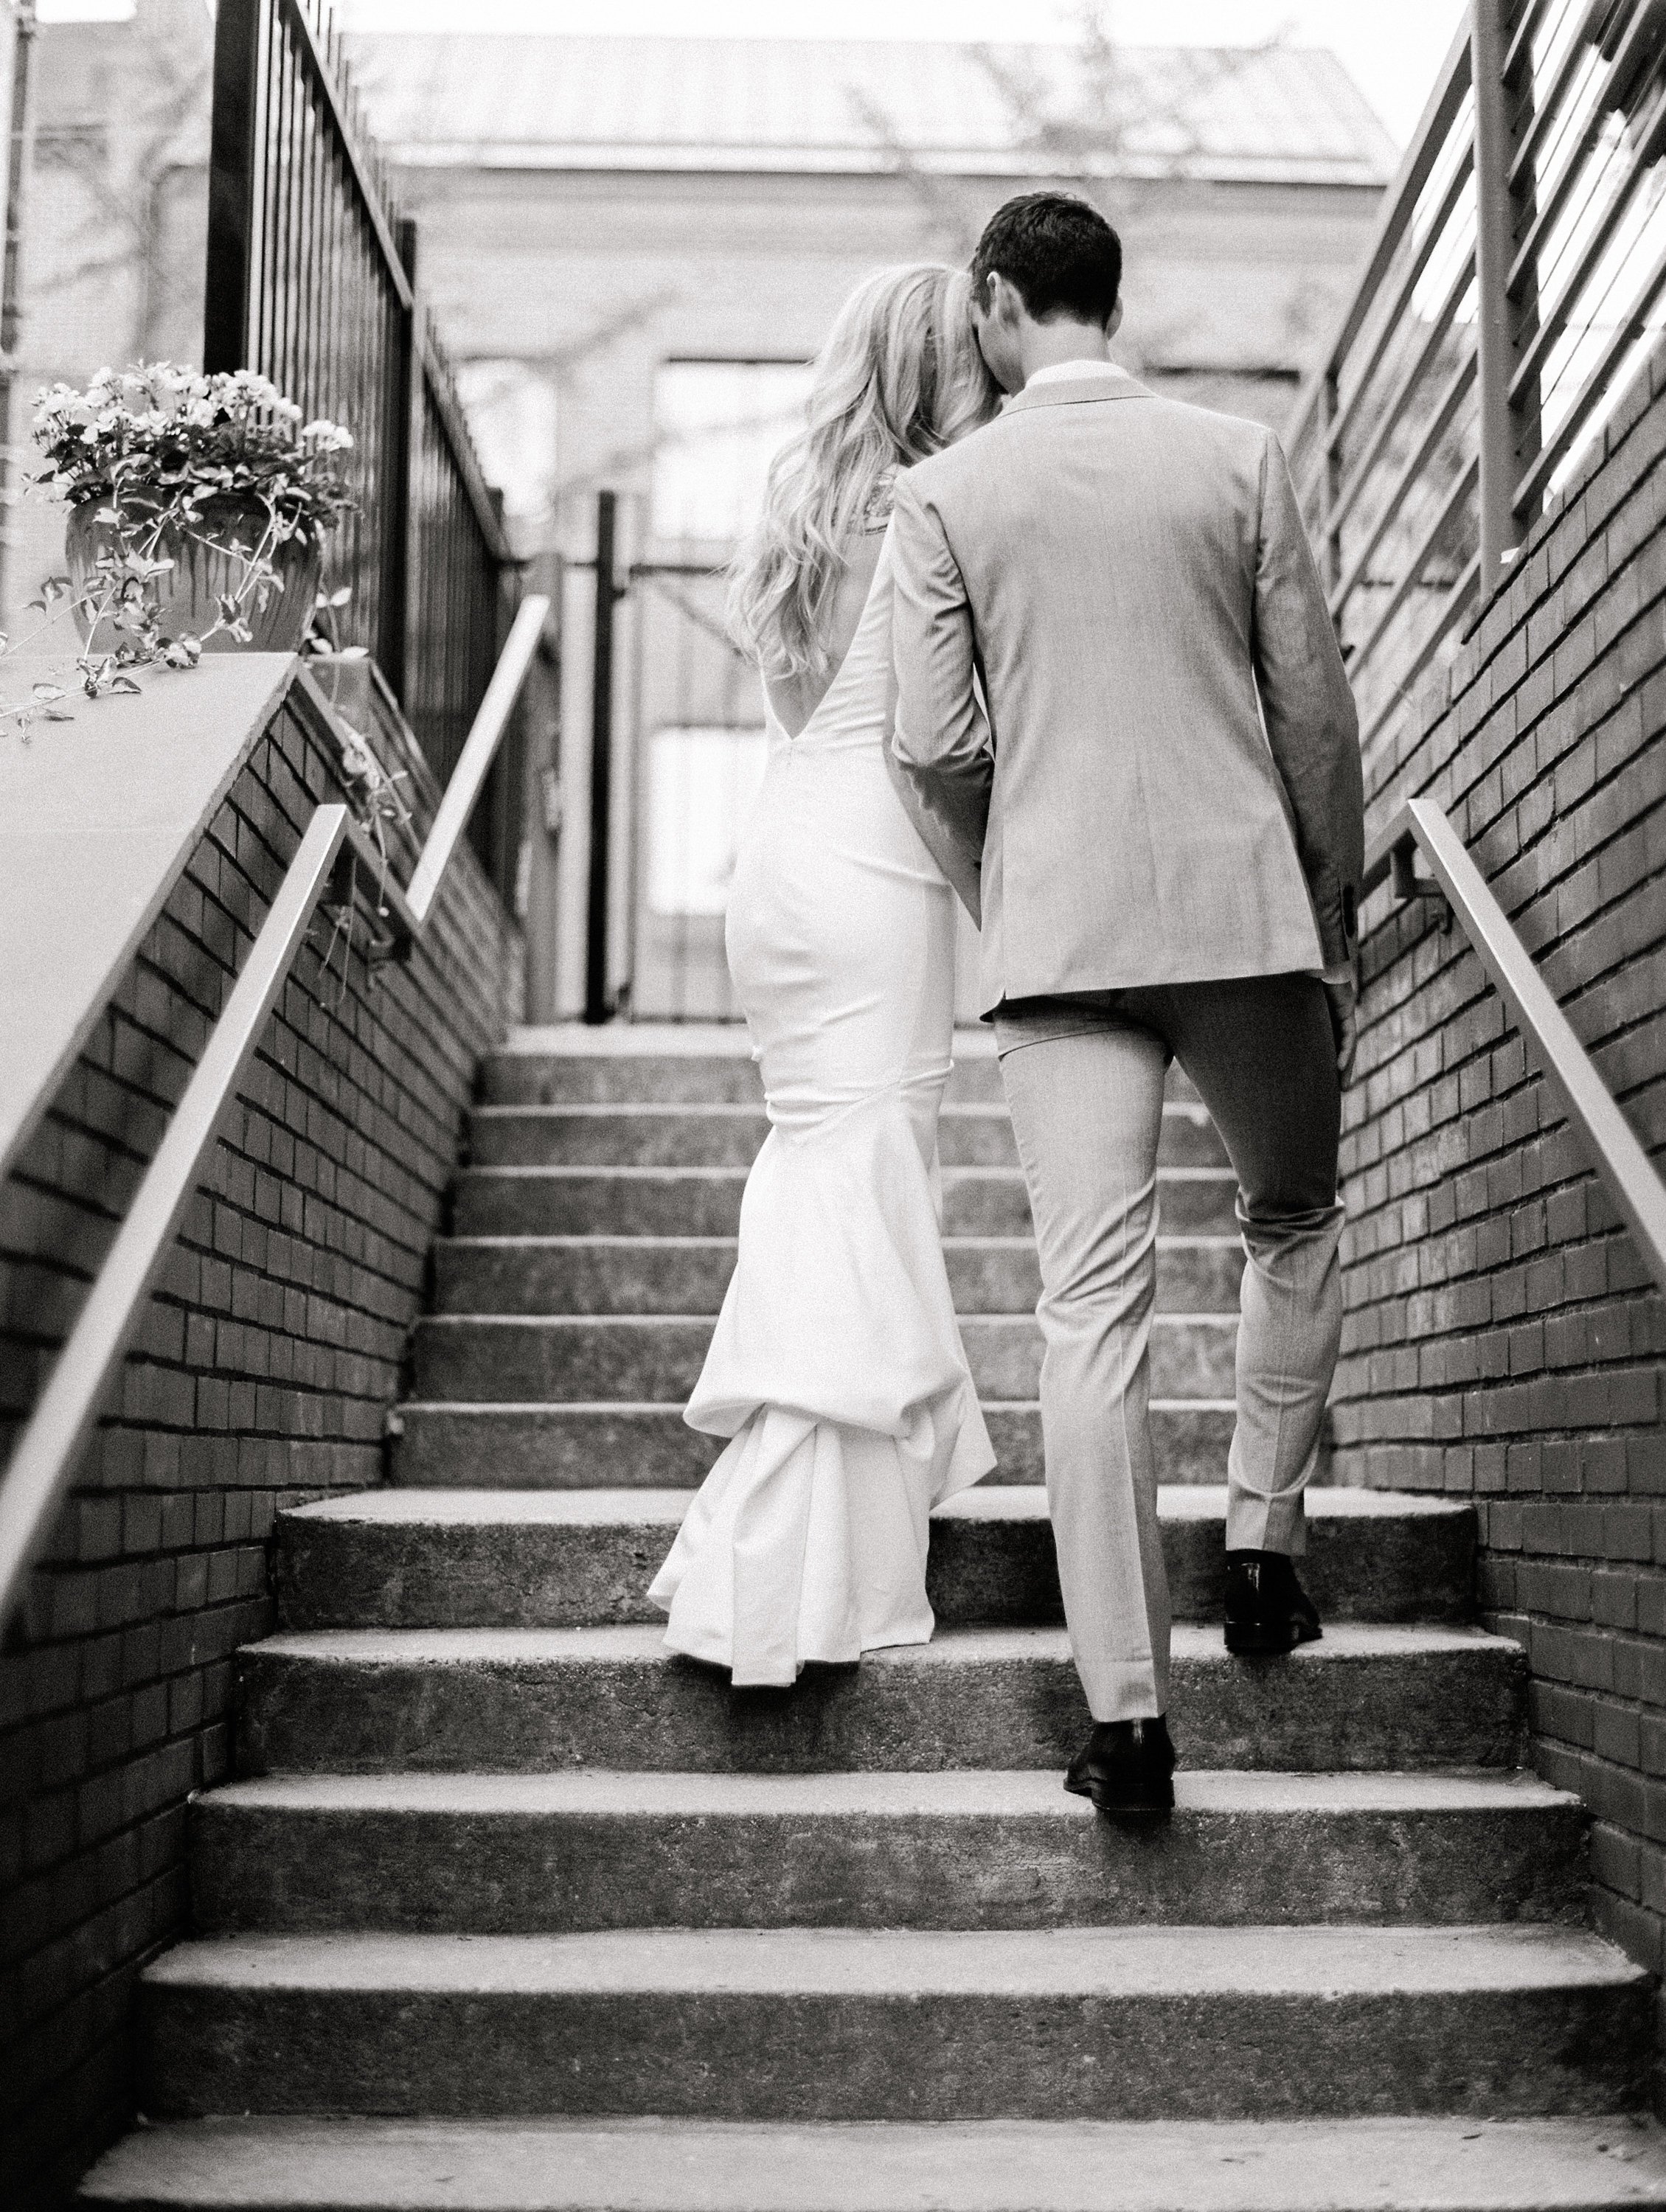 Couple ascending stairs kissing black and white